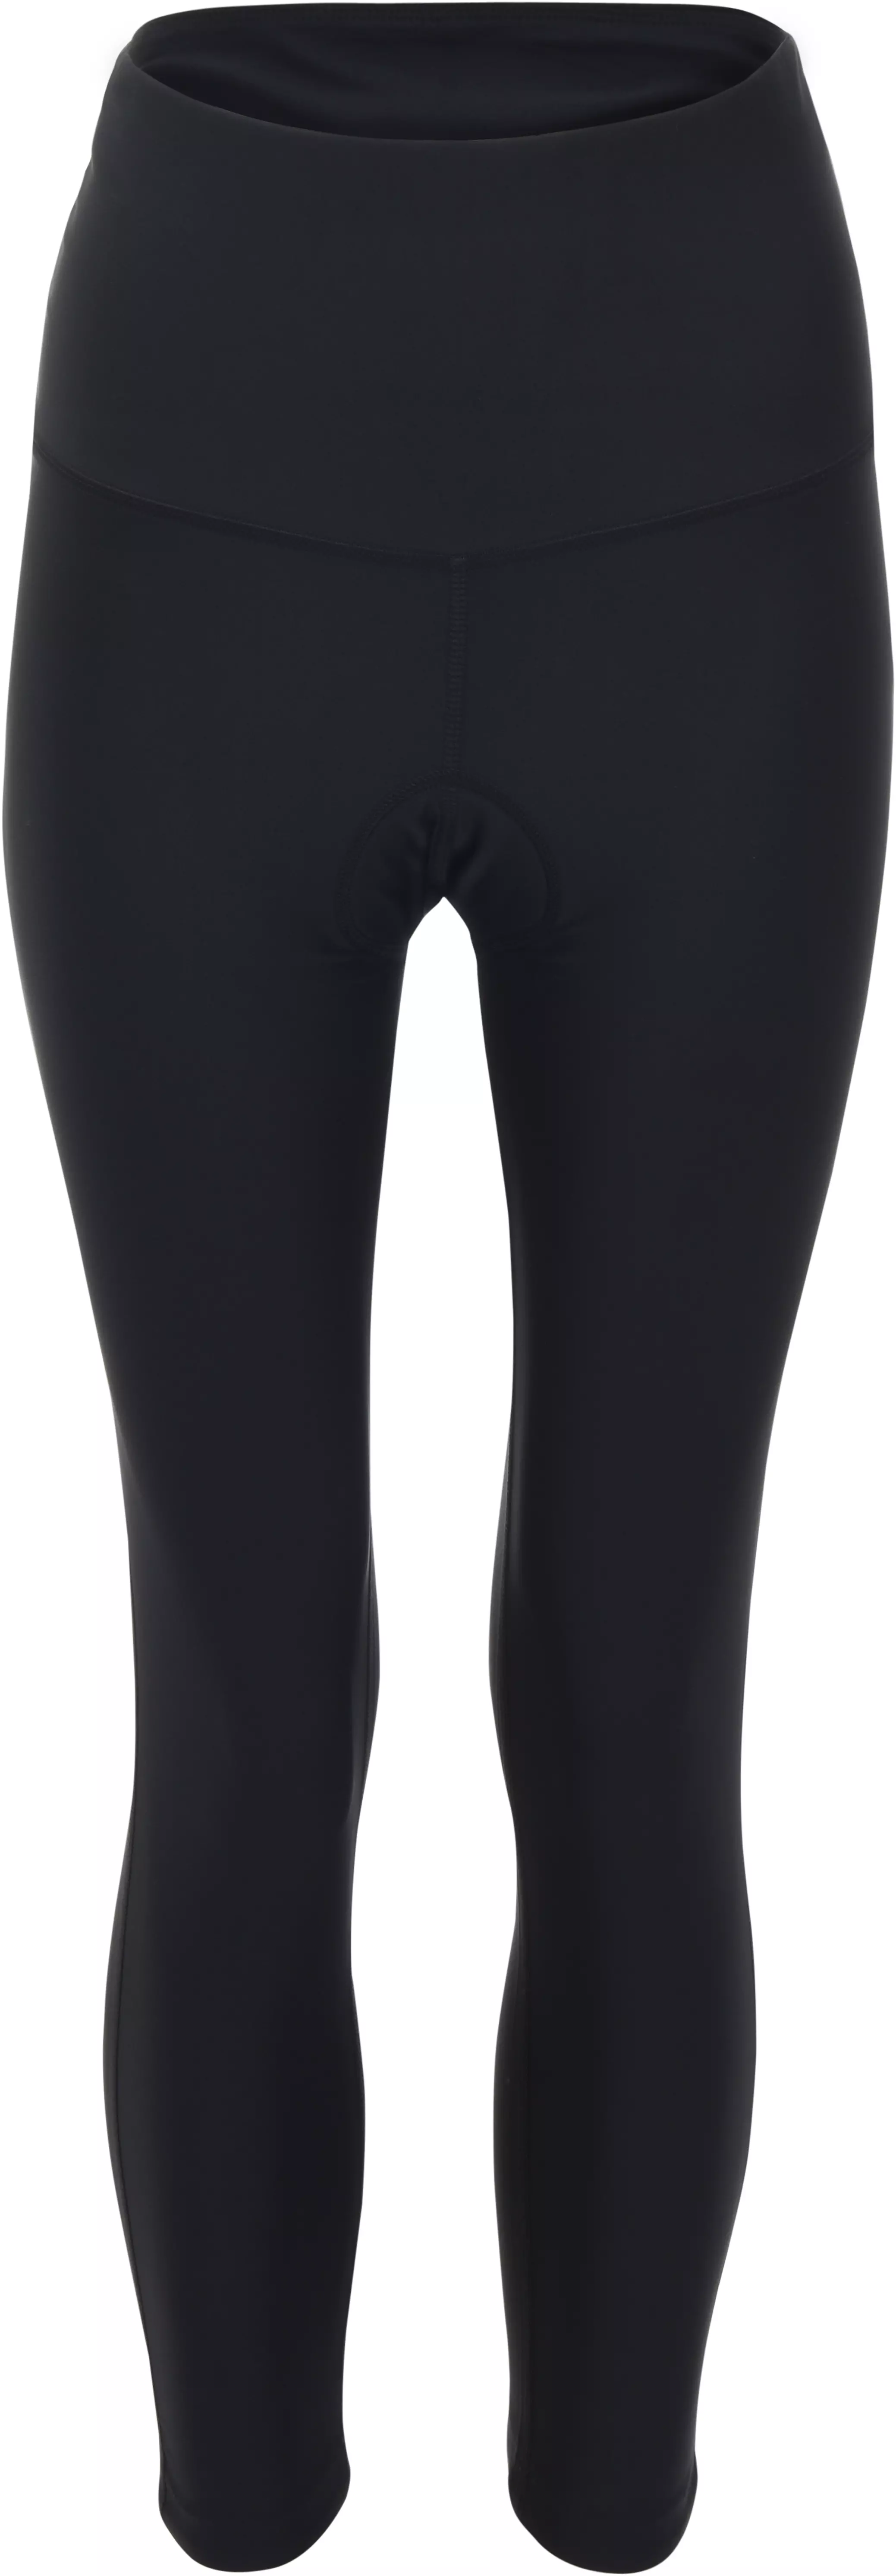 padded cycling trousers